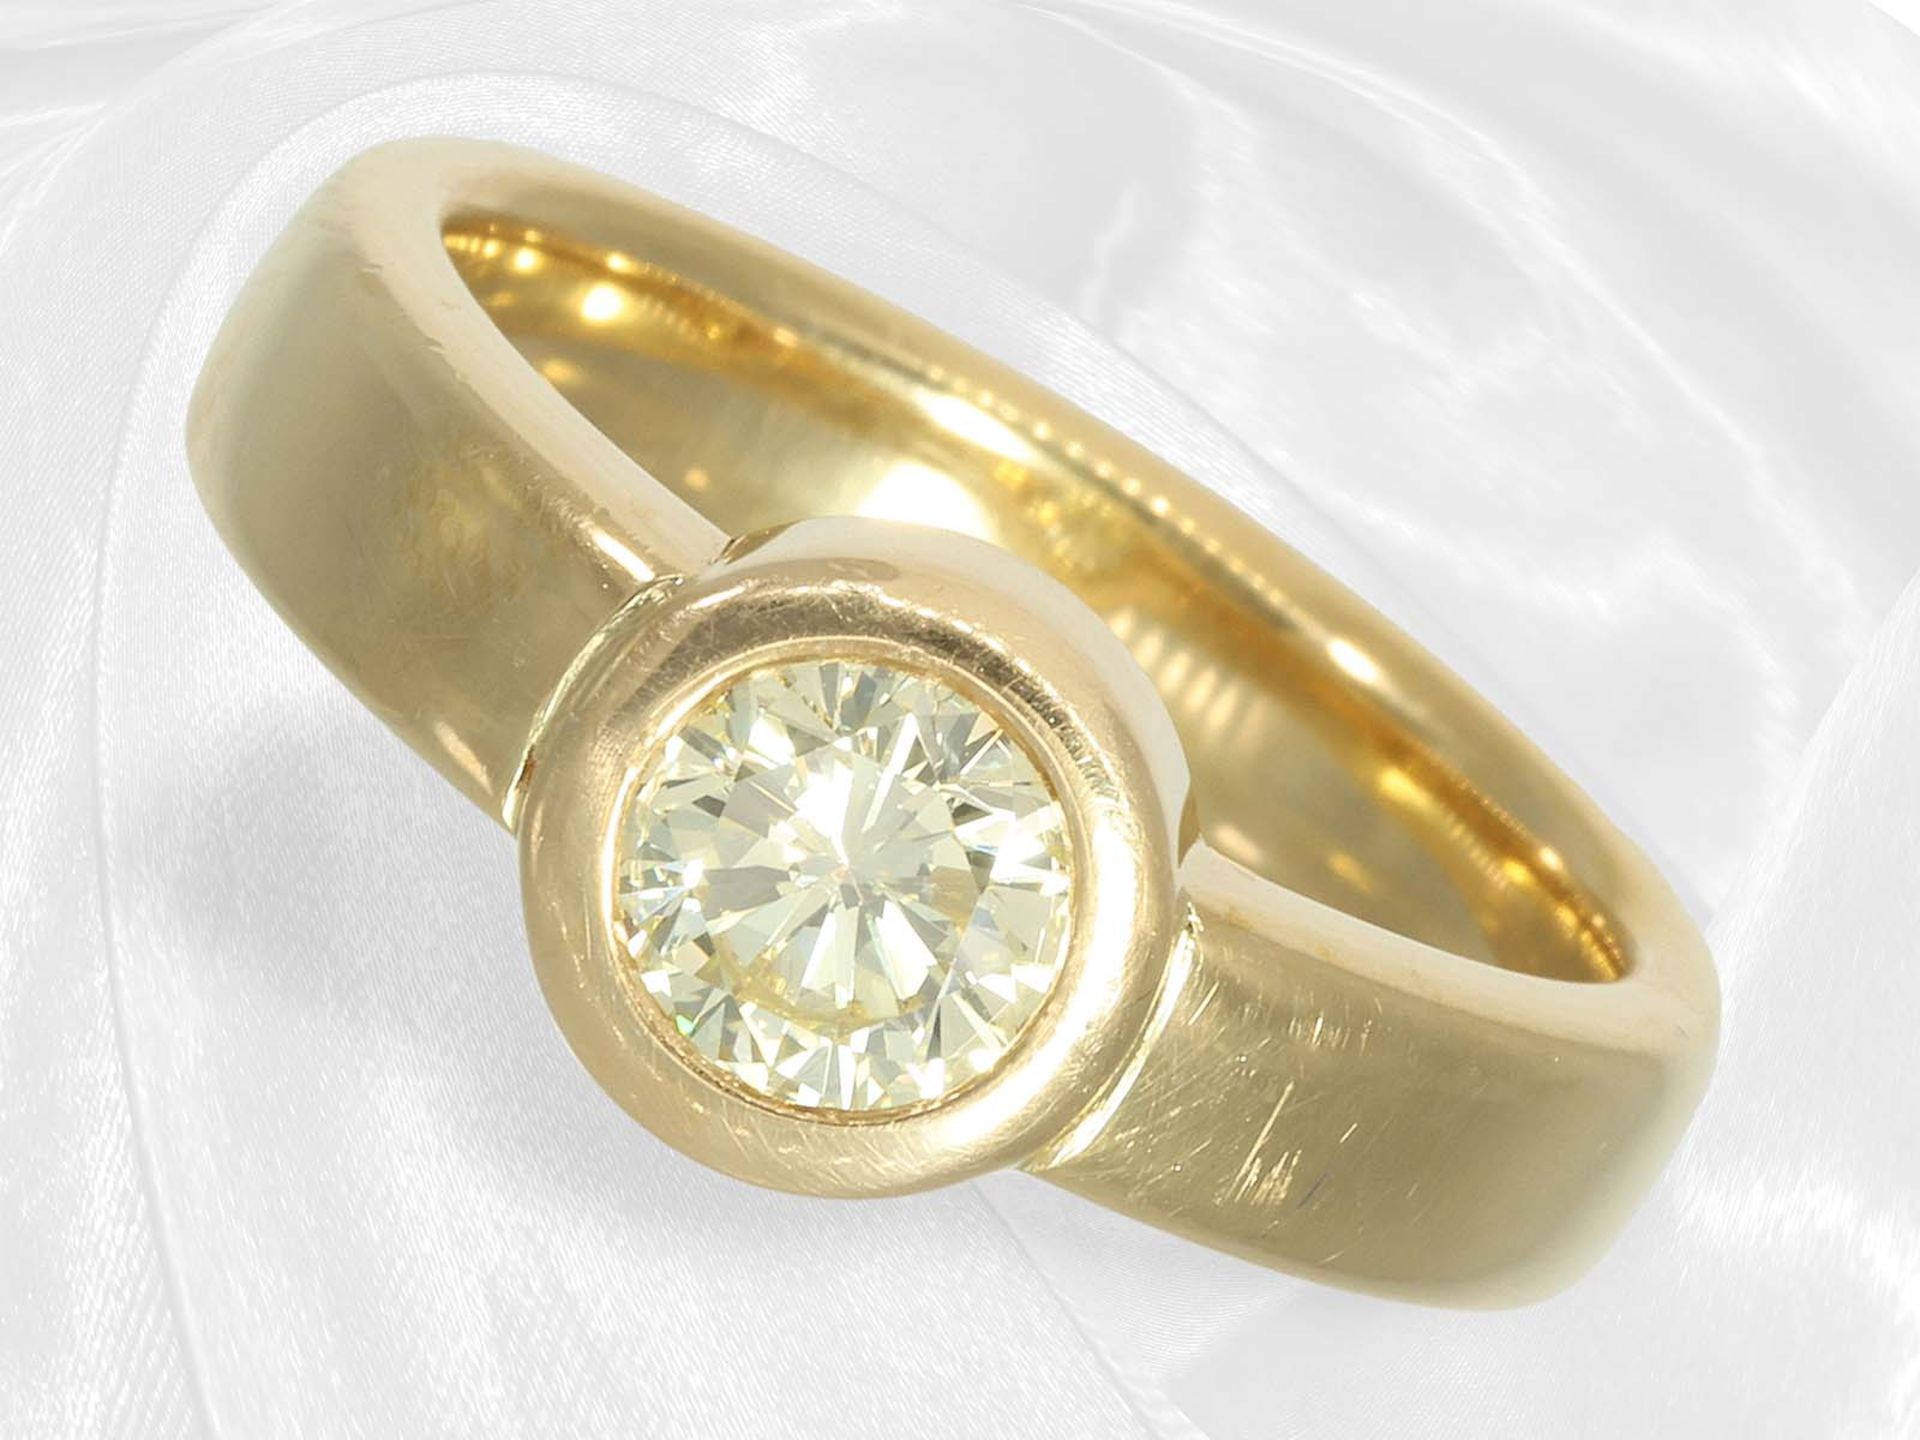 Solid solitaire goldsmith ring with a brilliant-cut diamond of approx. 0.65ct